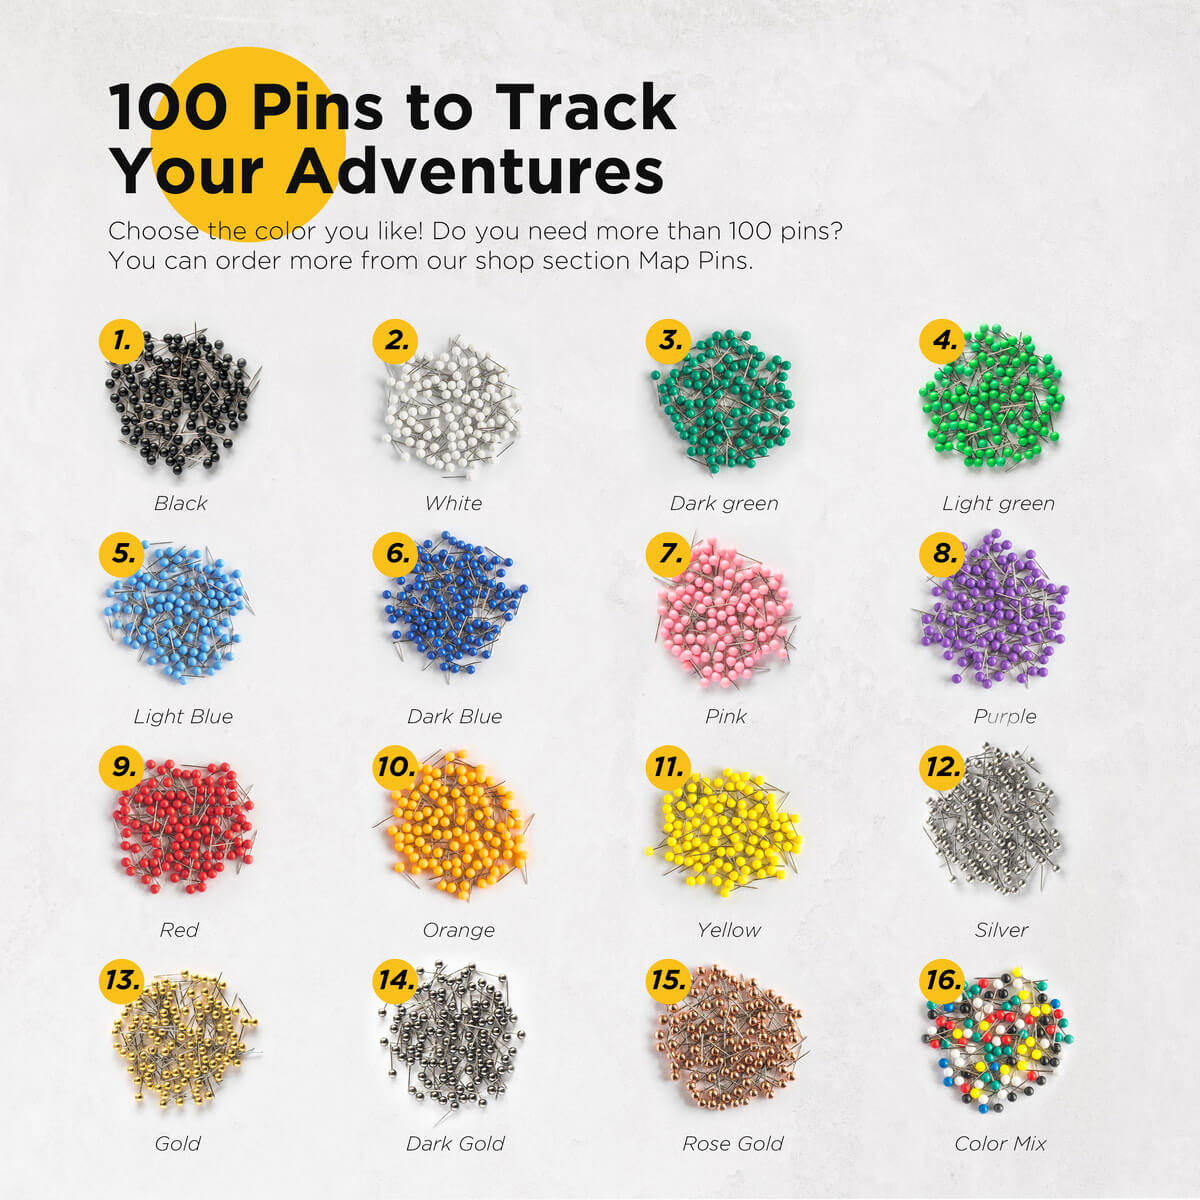 Blue Map Pins, Colored Map Pins